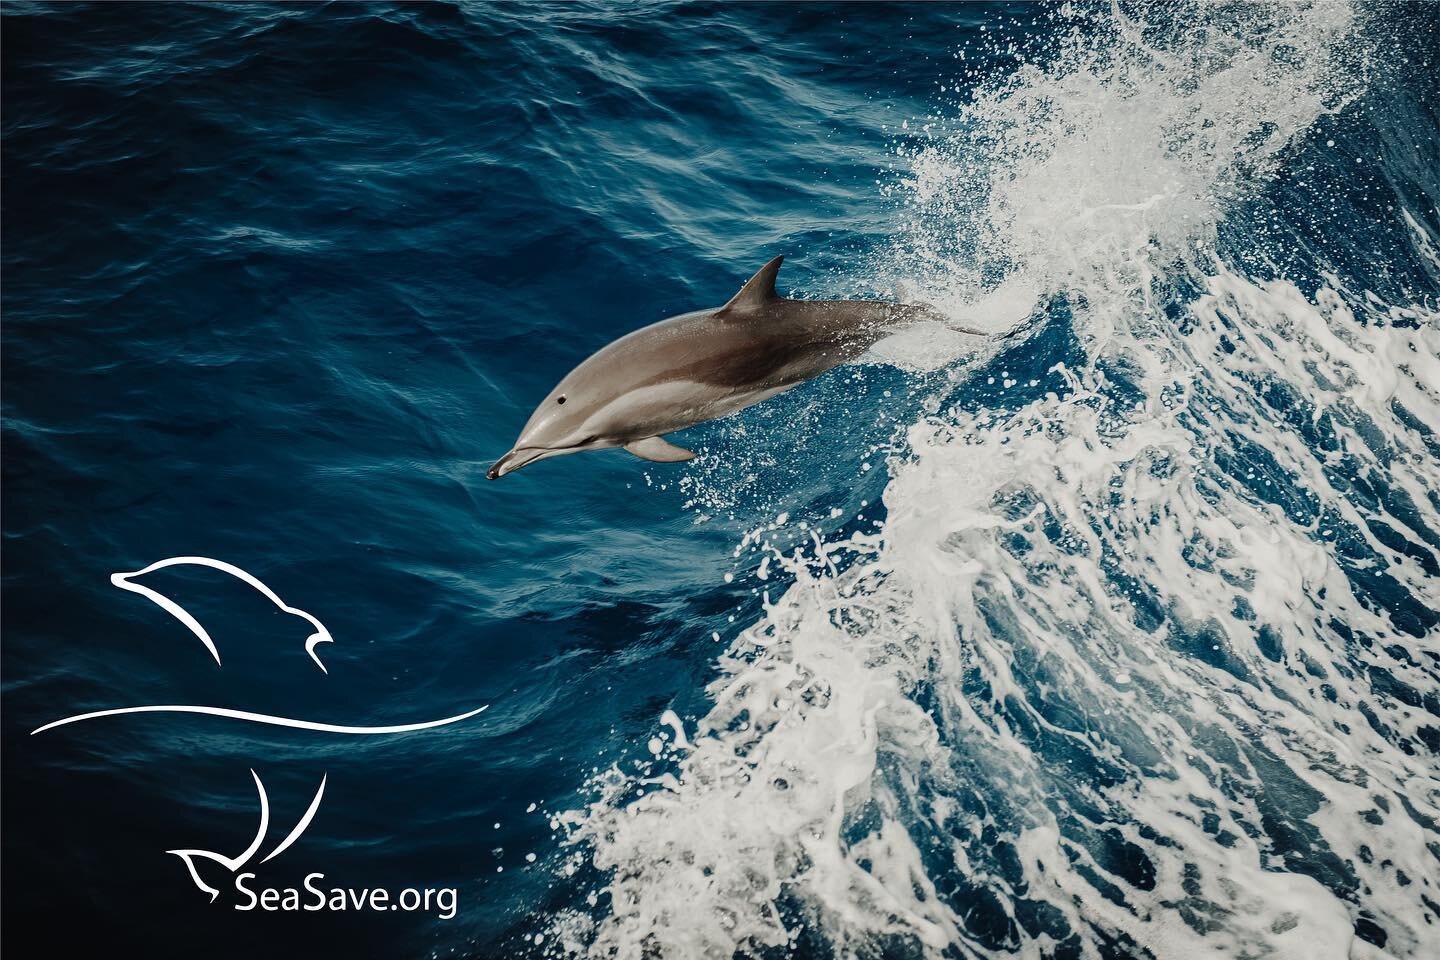 Now Partners with Sea Save Foundation!

&ldquo;Sea Save Foundation strives to protect oceans by raising awareness about the beauty of the marine ecosystems and their fundamental importance to human survival. We seek solutions, advance public policy, 